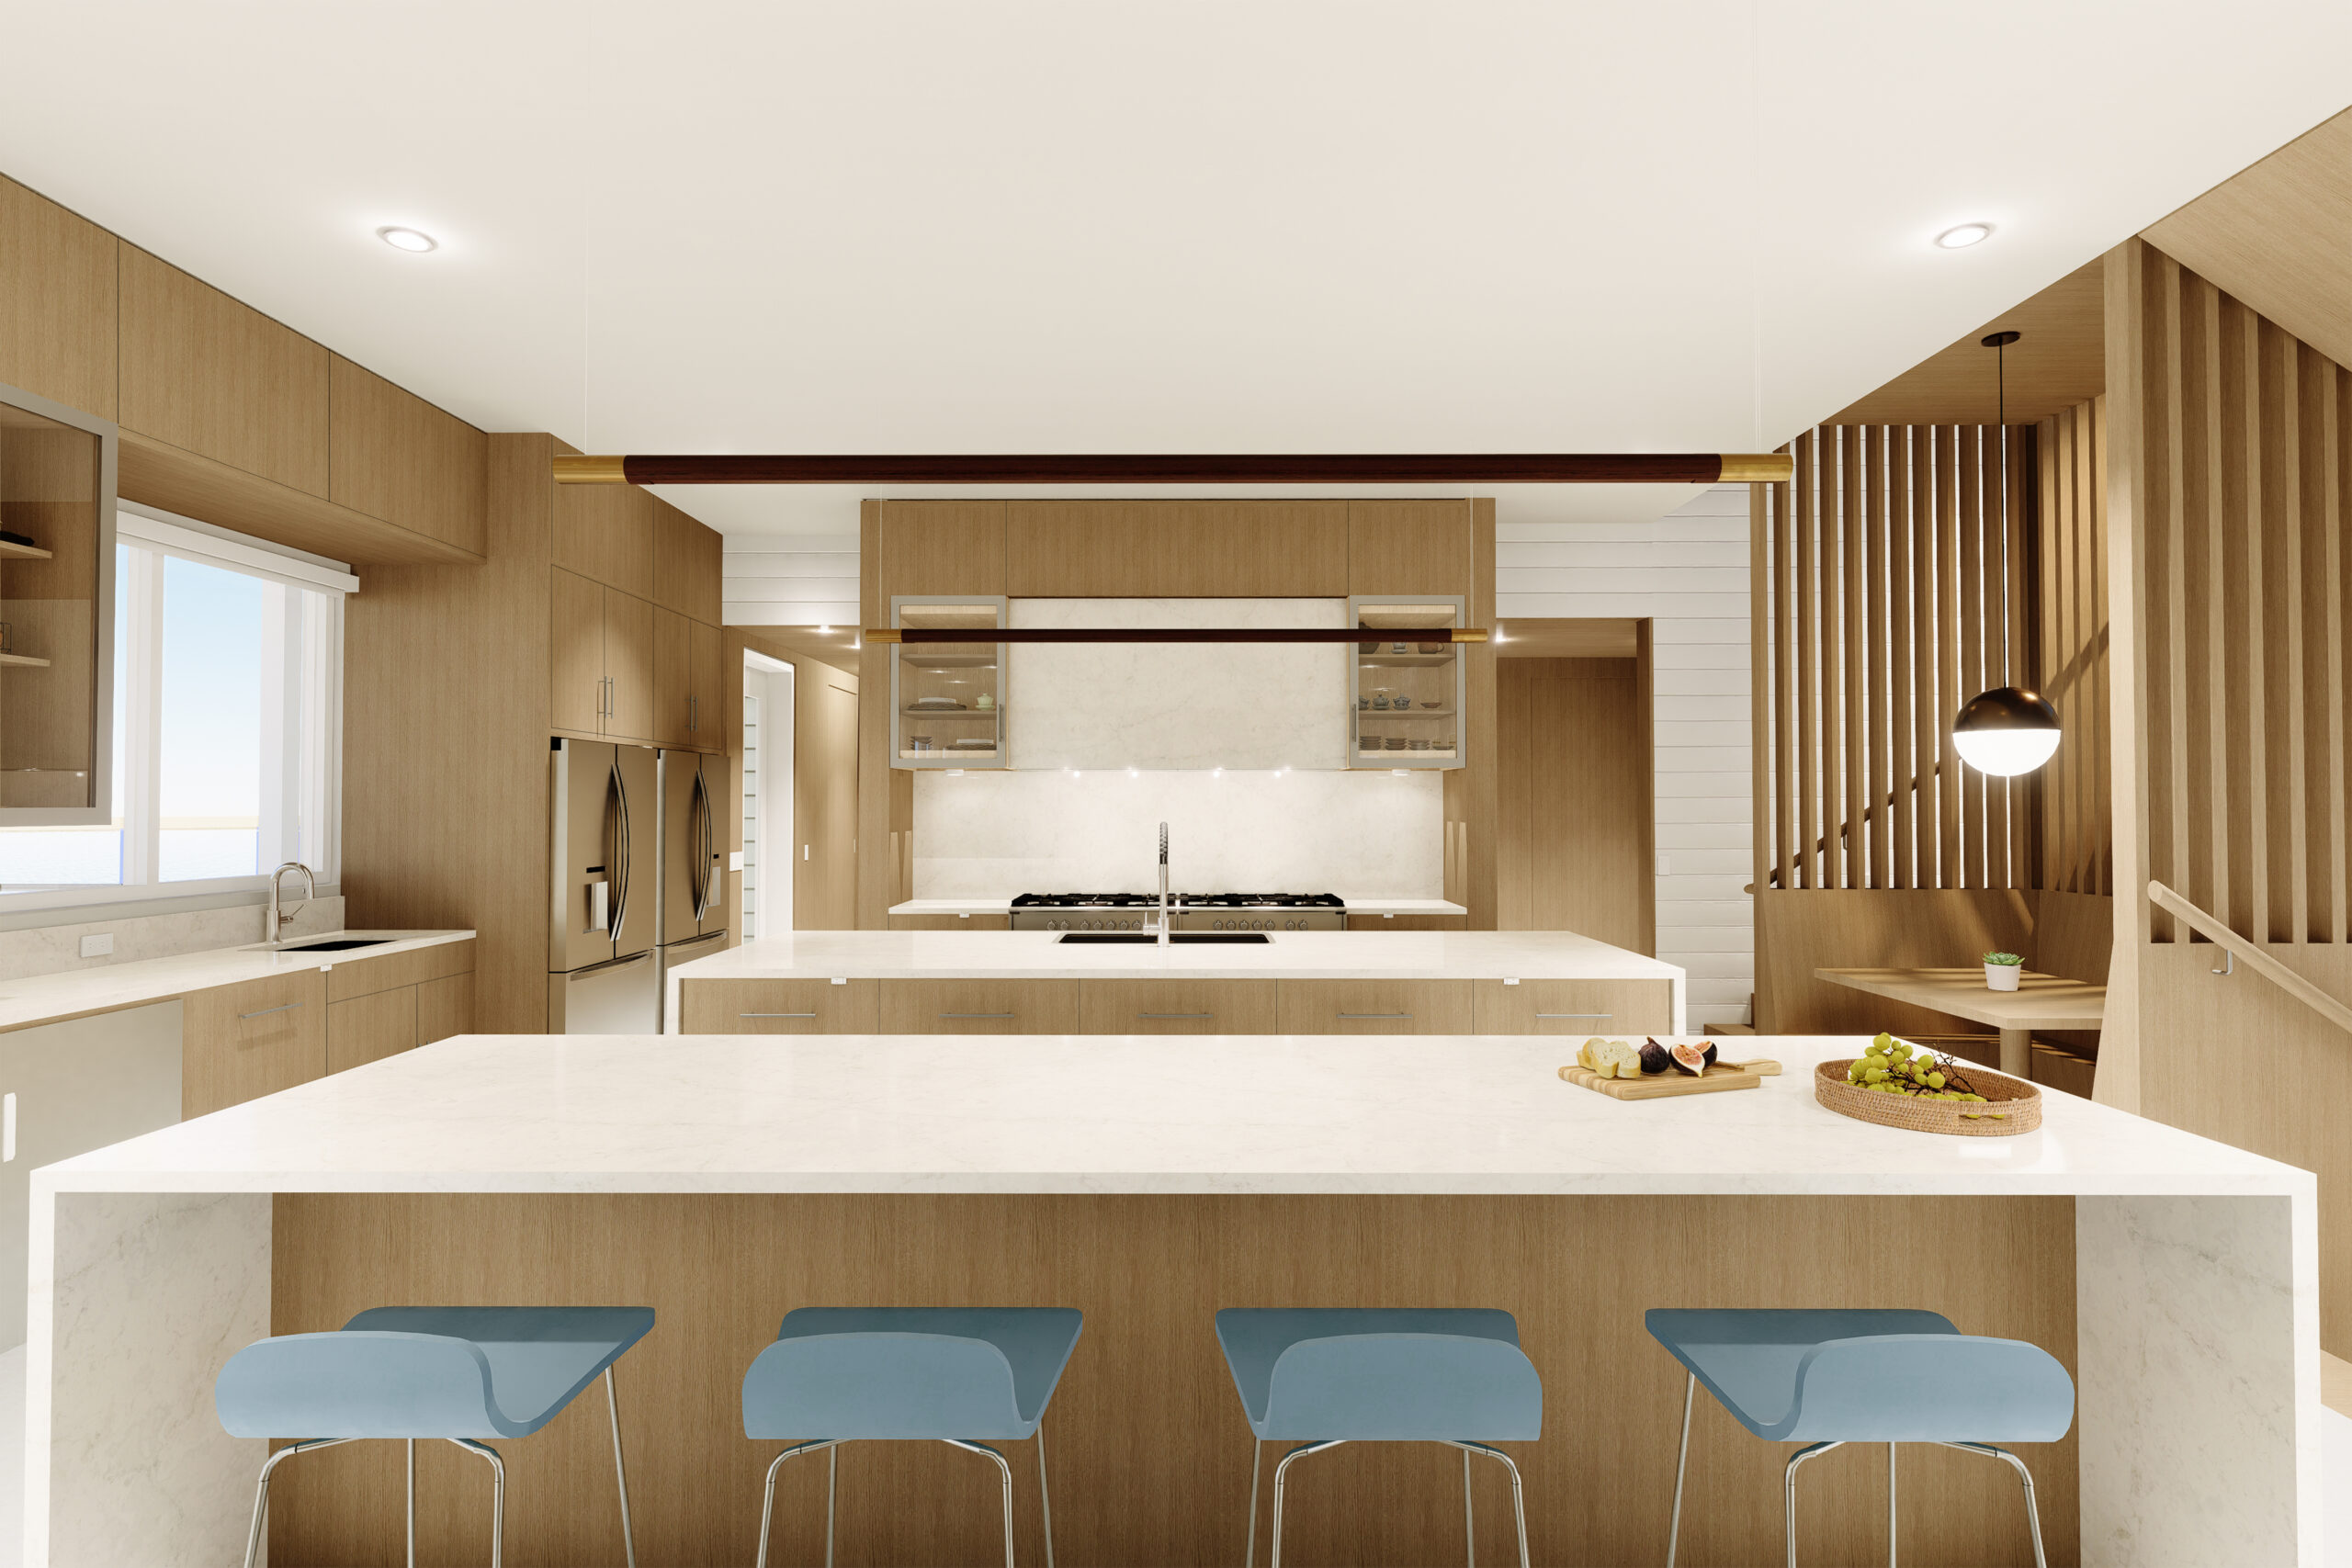 Rendering of a kitchen with marble counters and wood cabinets.